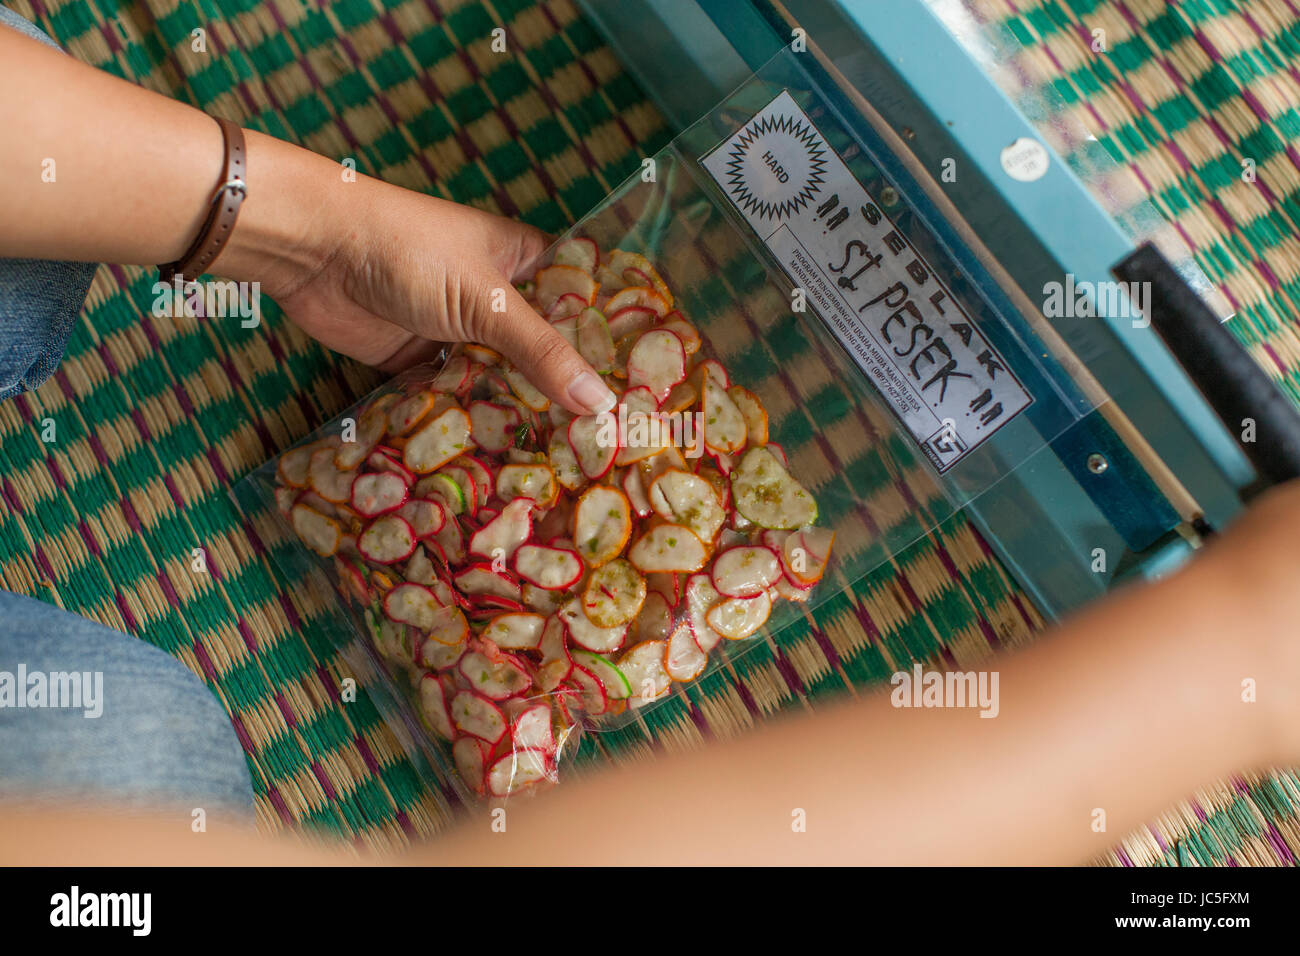 Business woman packaging up snacks to sell, Indonesia, Asia Stock Photo